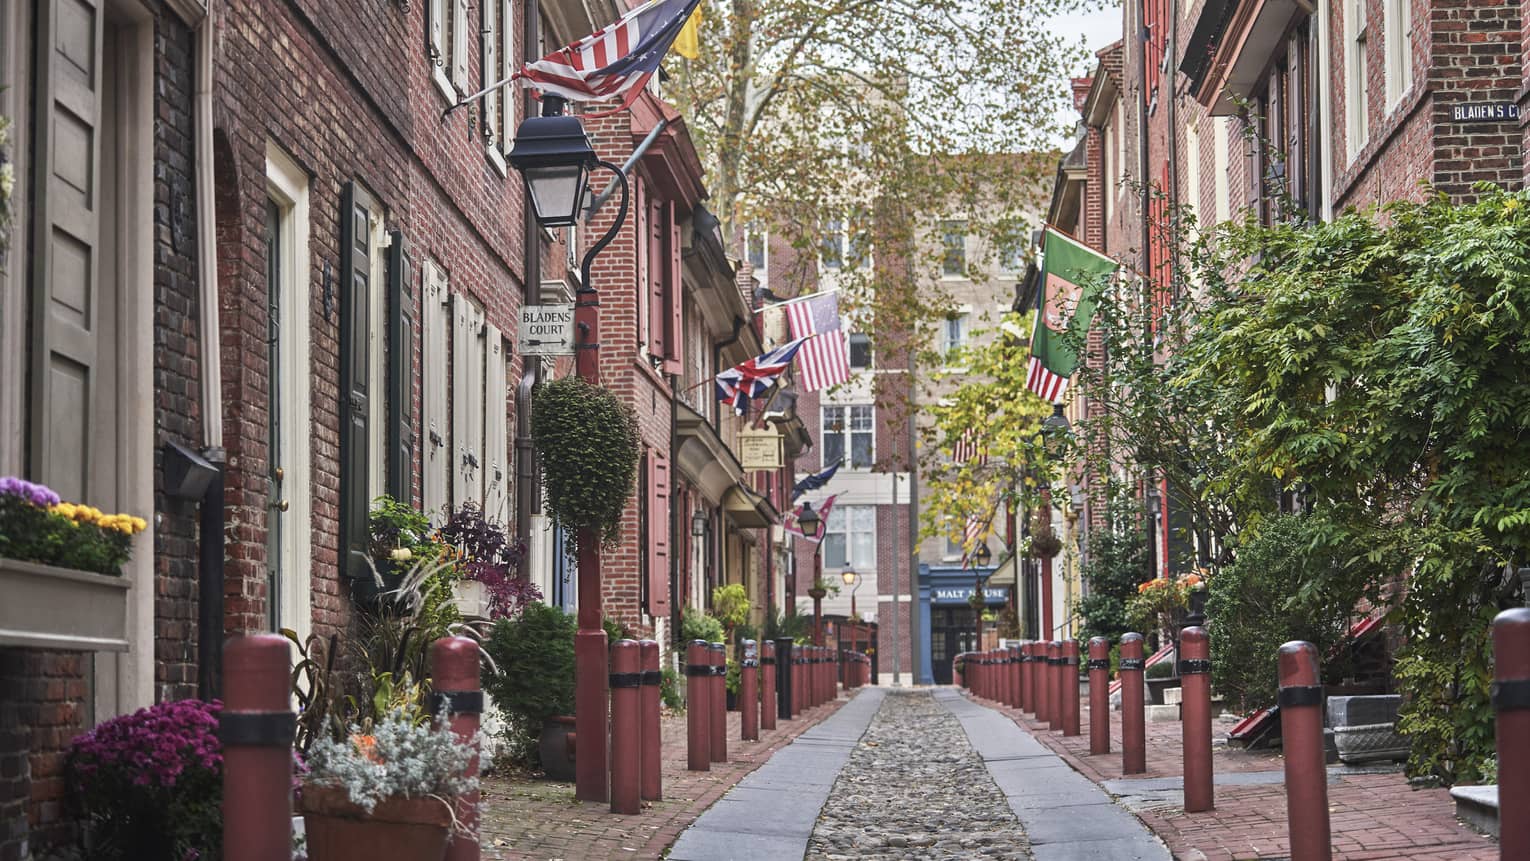 An old cobble-stone street lined with charming brick buildings, plants and patriotic flags